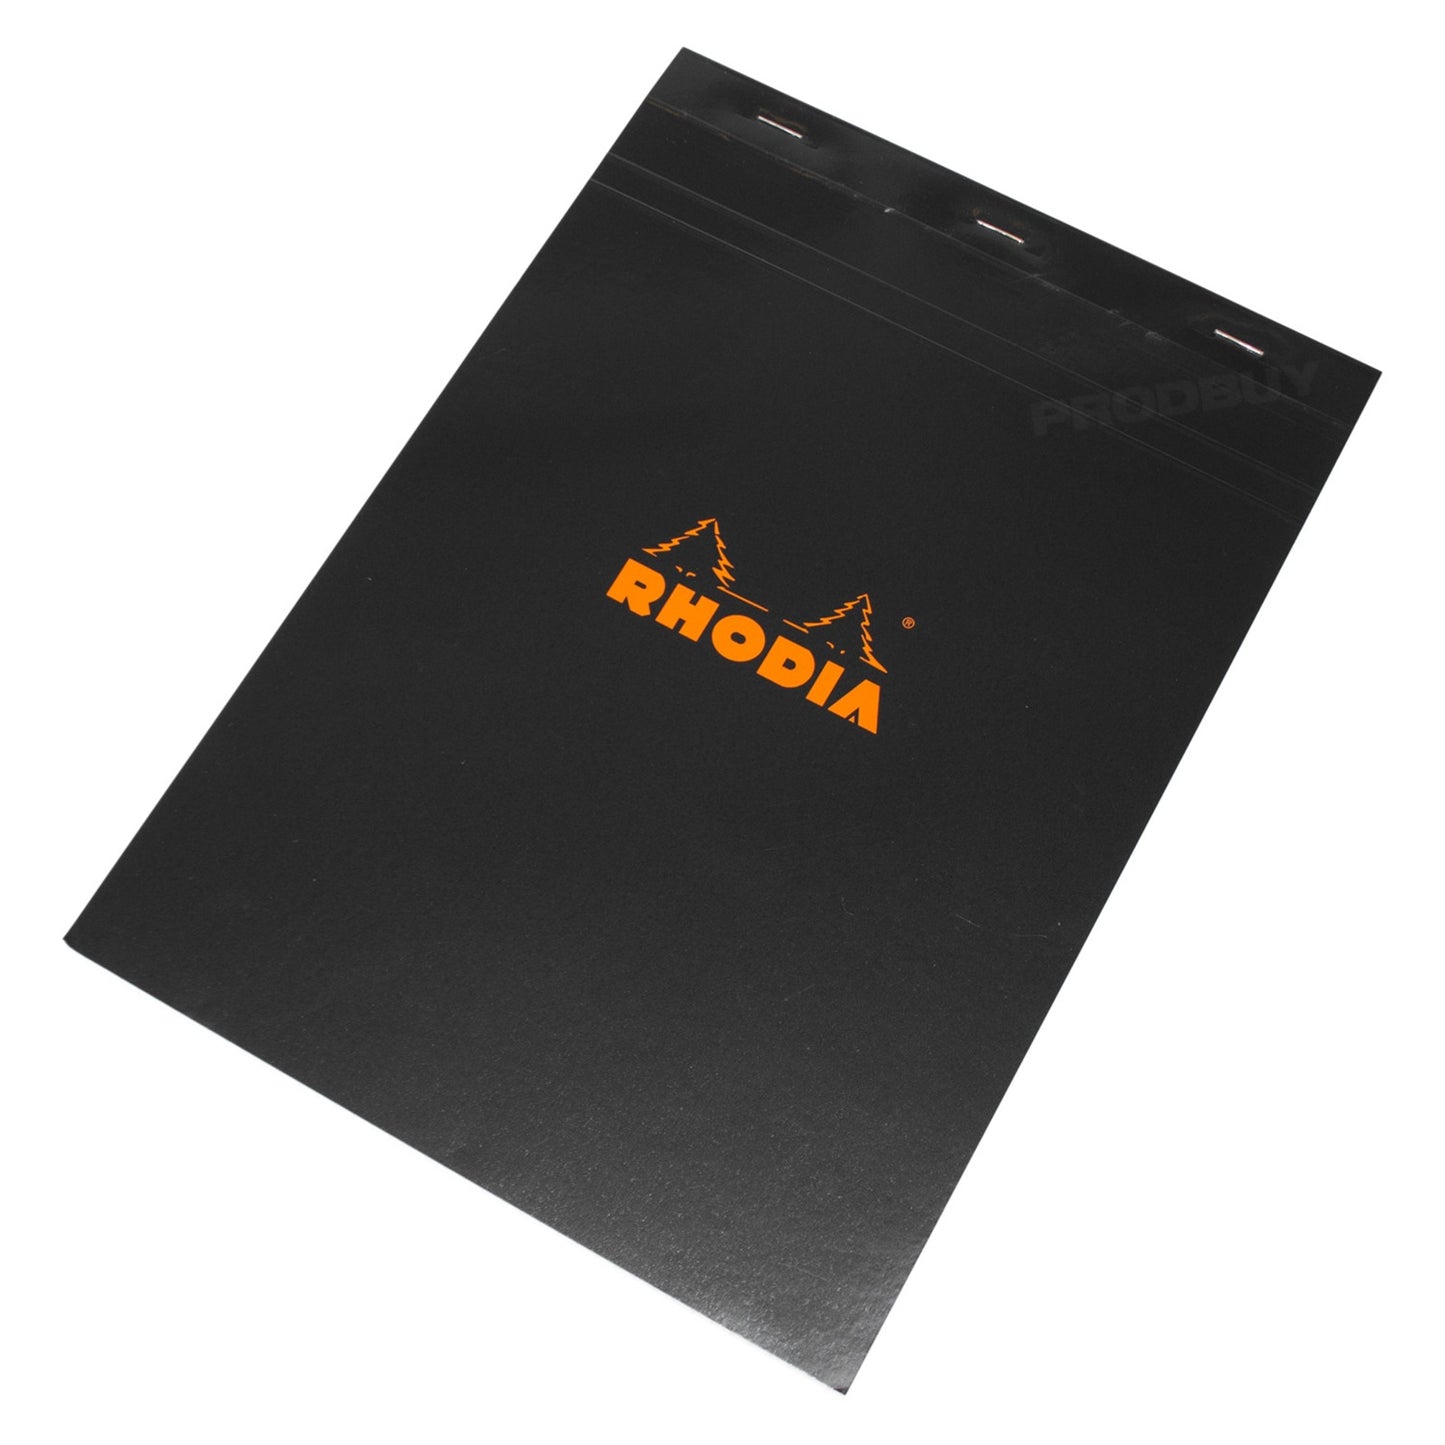 Set of 3 Rhodia A4 Notebooks with 5x5mm Square Grid Pages & Black Covers